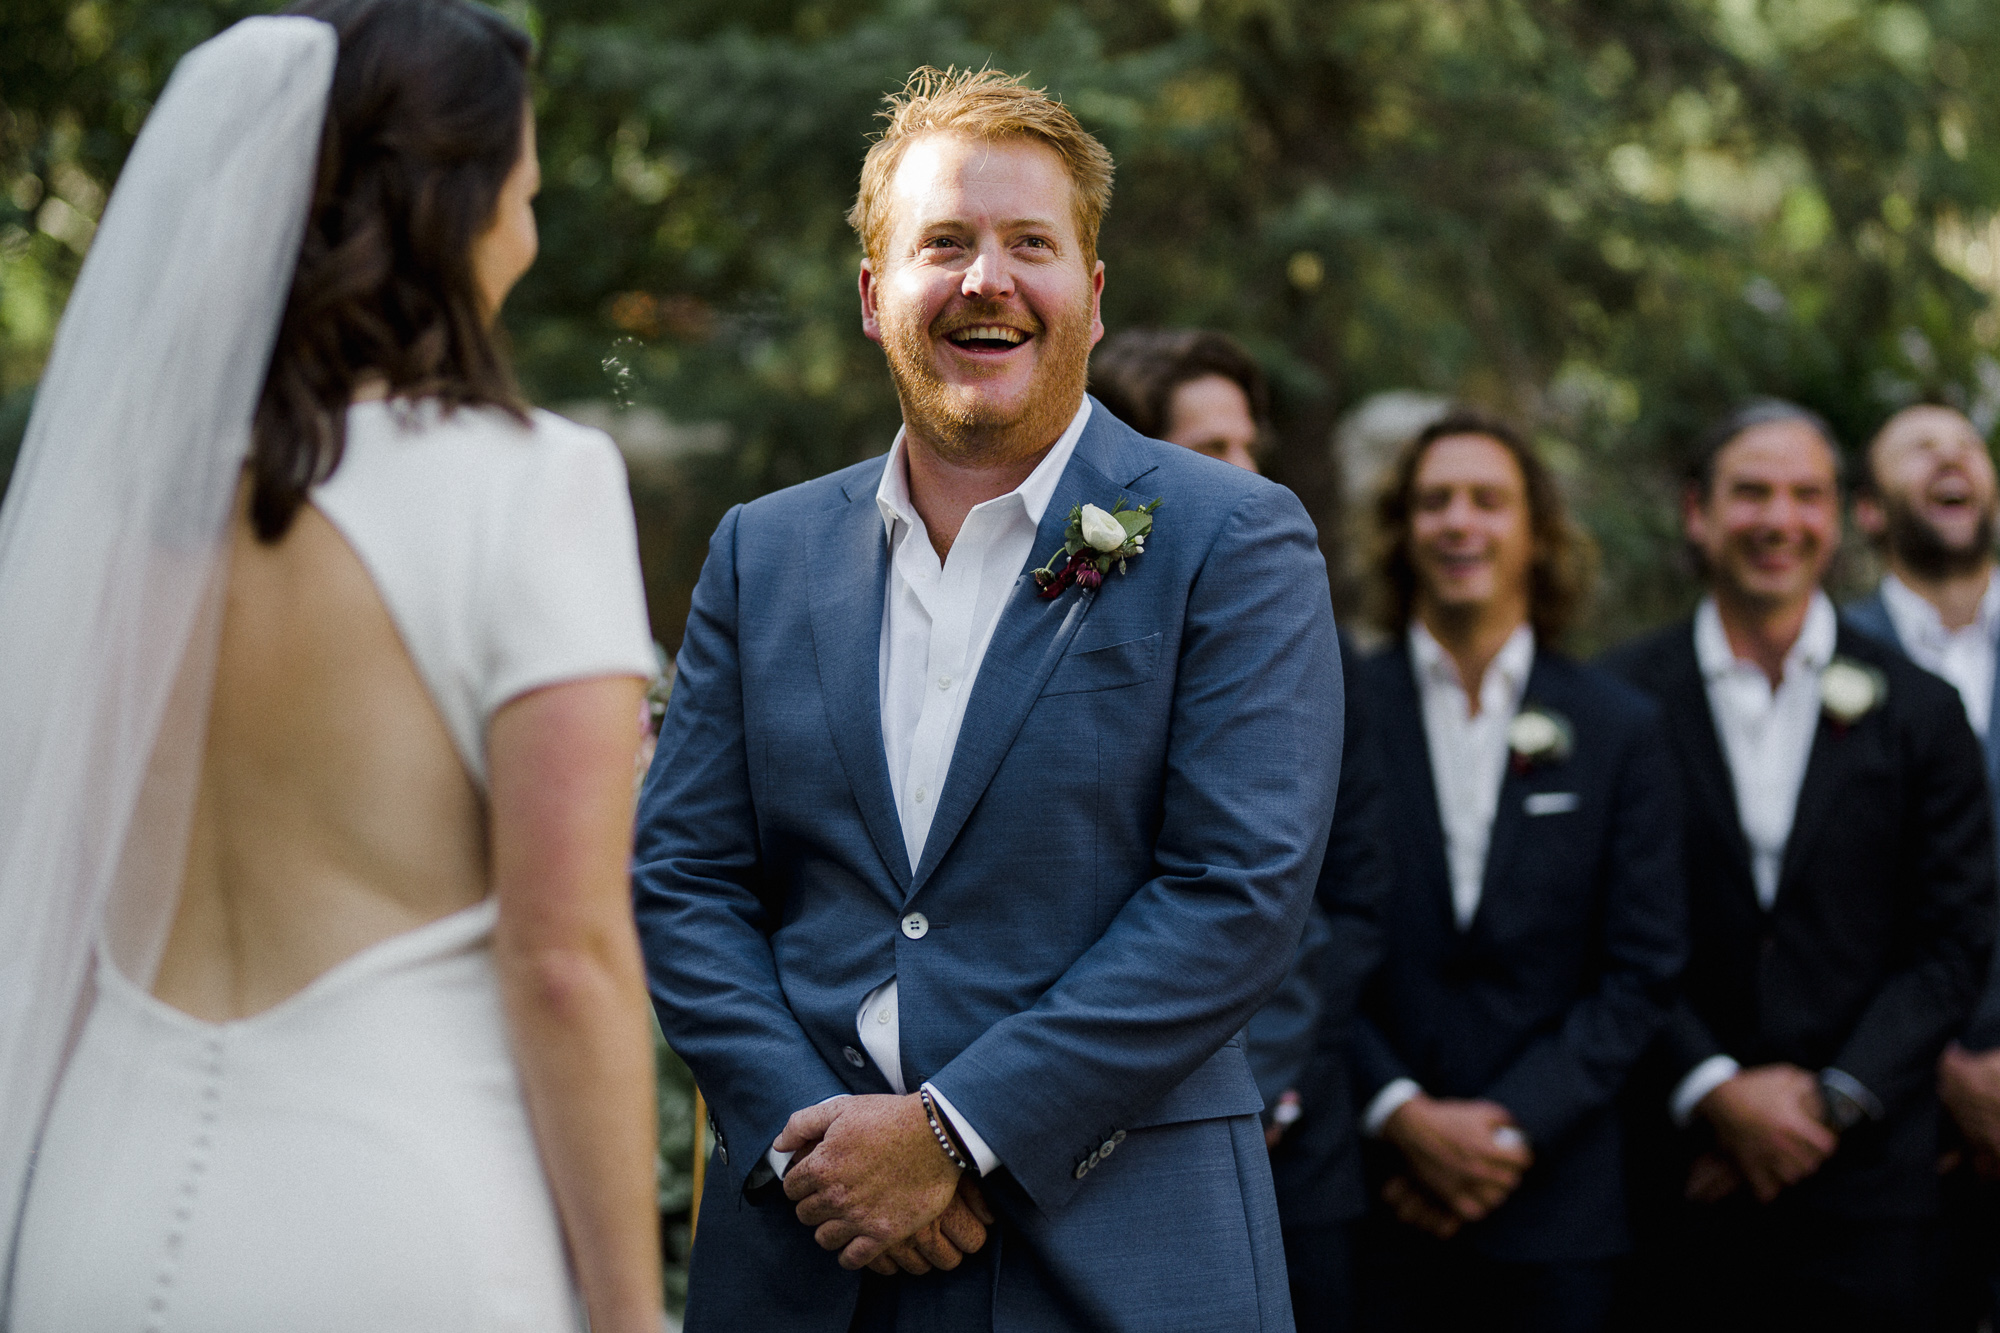 Groom Smiling at Ceremony.